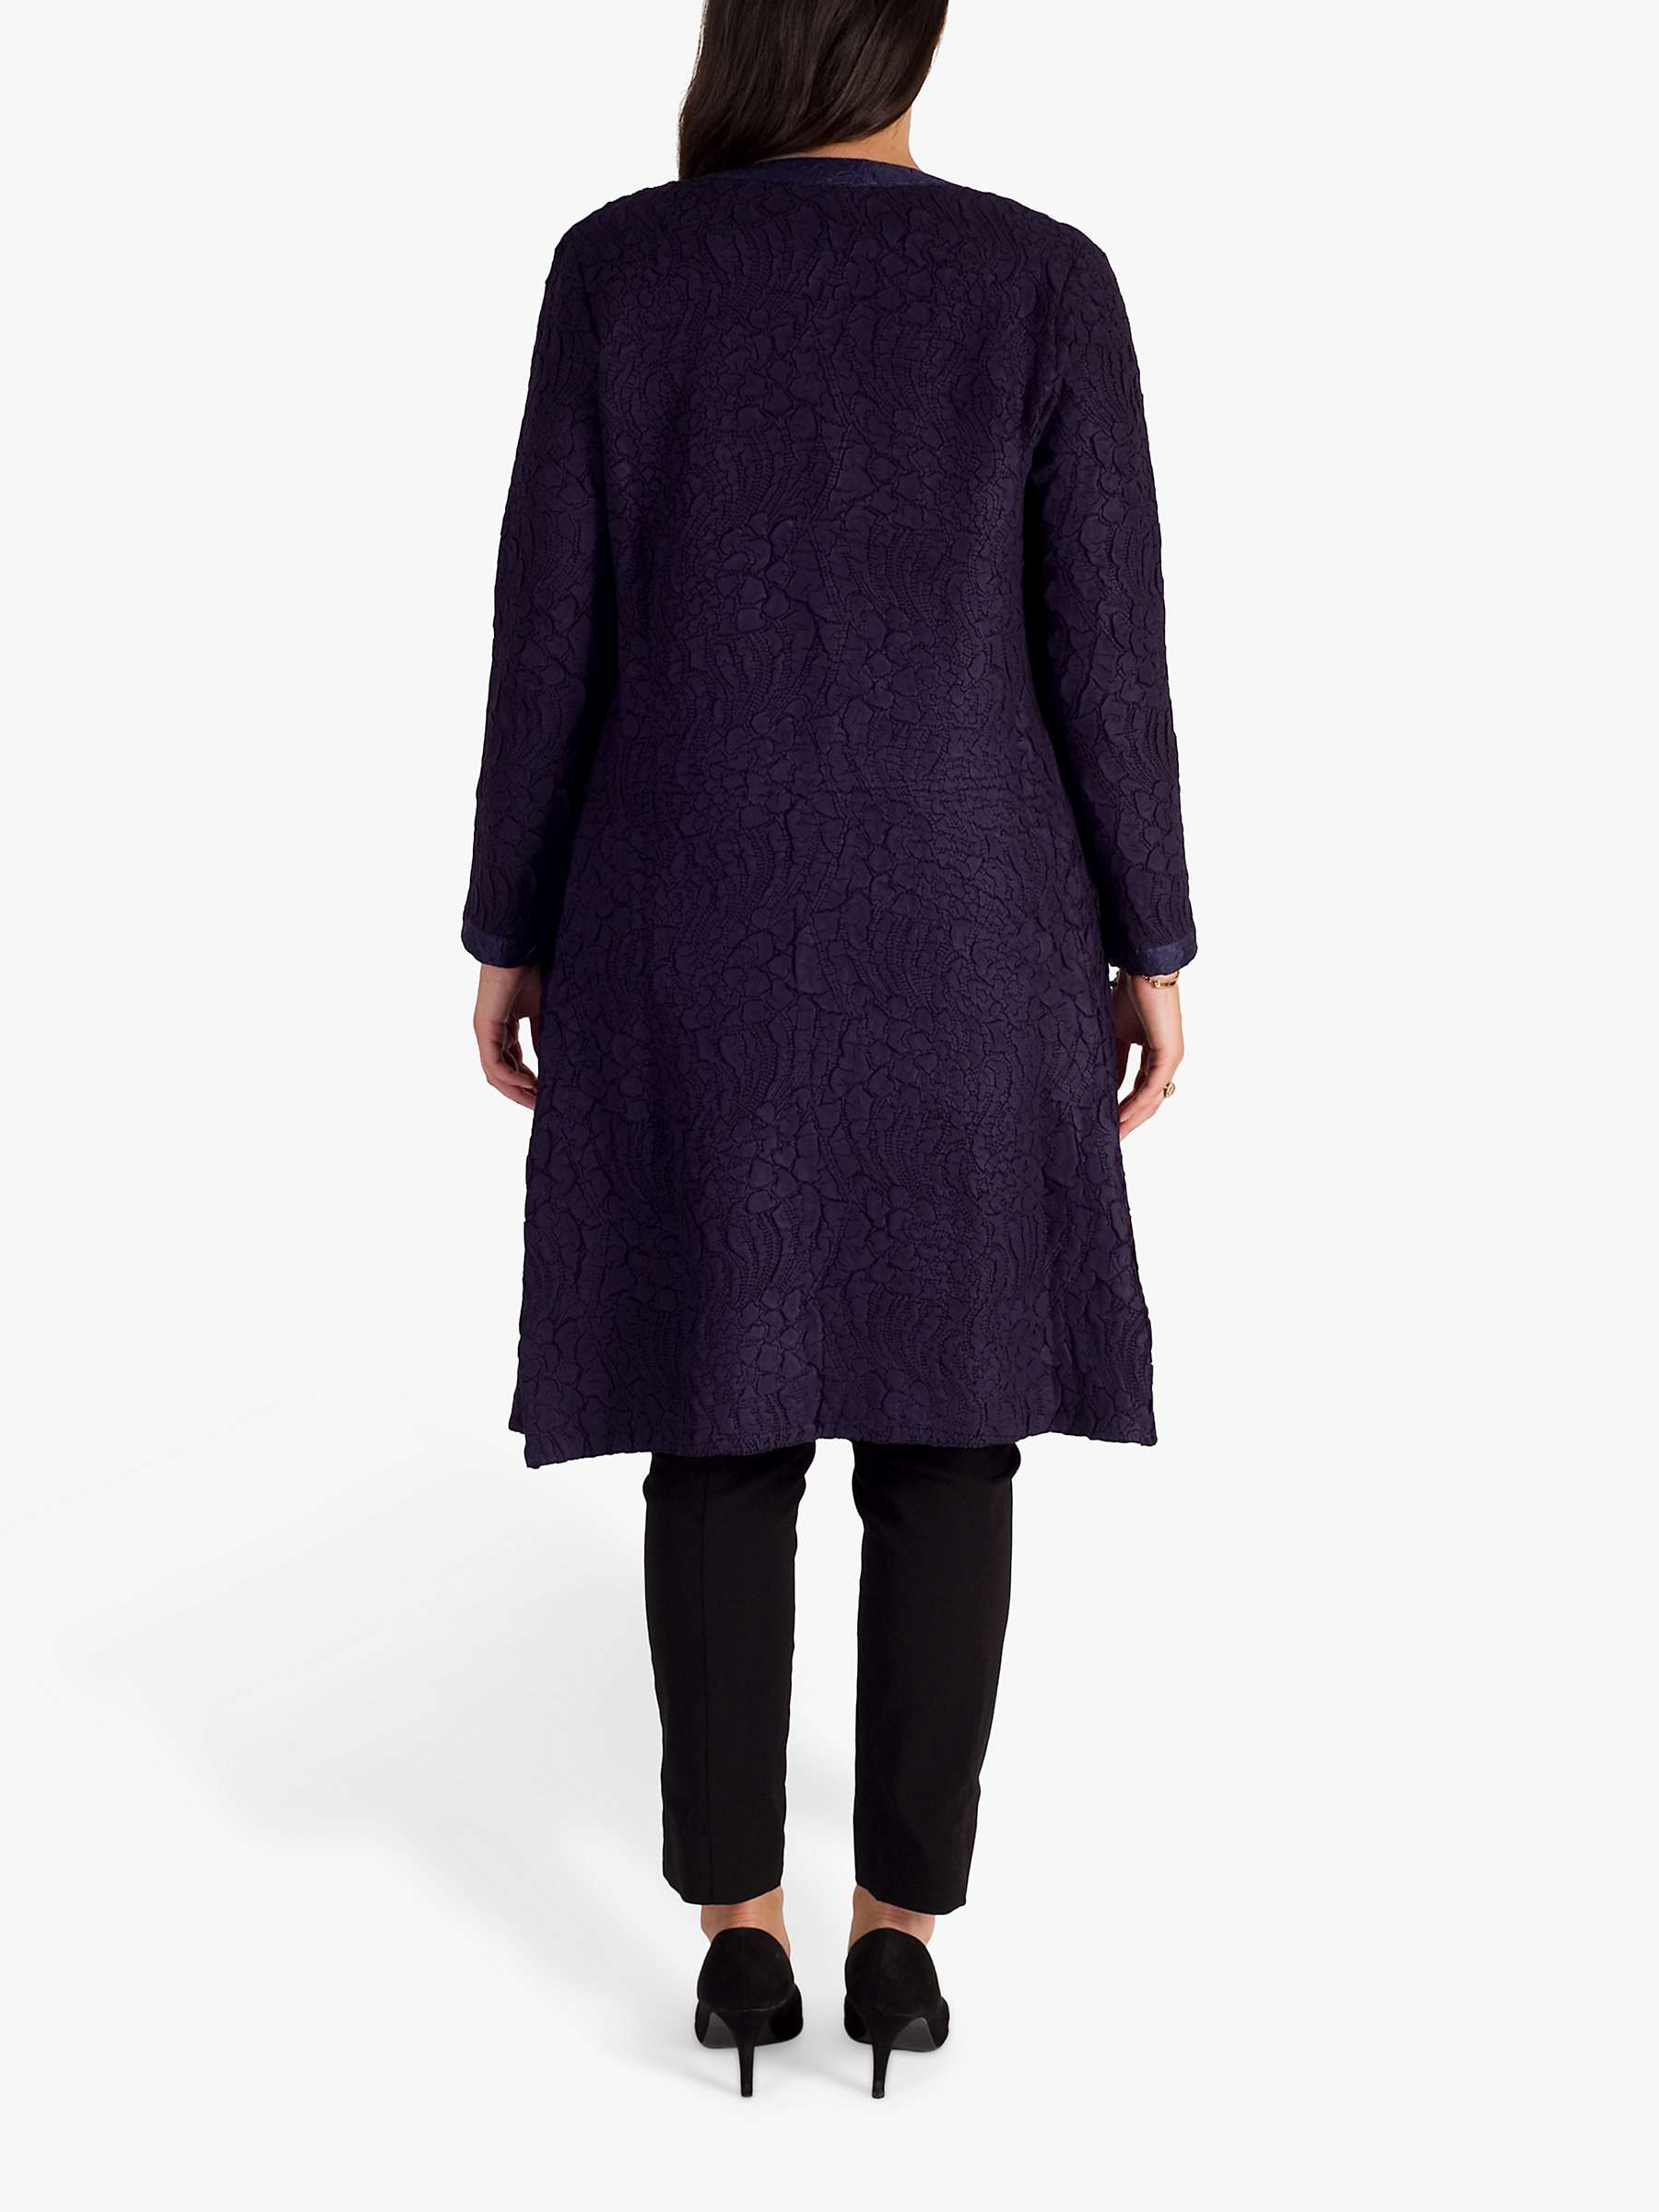 Buy chesca Suedette Crush Flared Coat Online at johnlewis.com